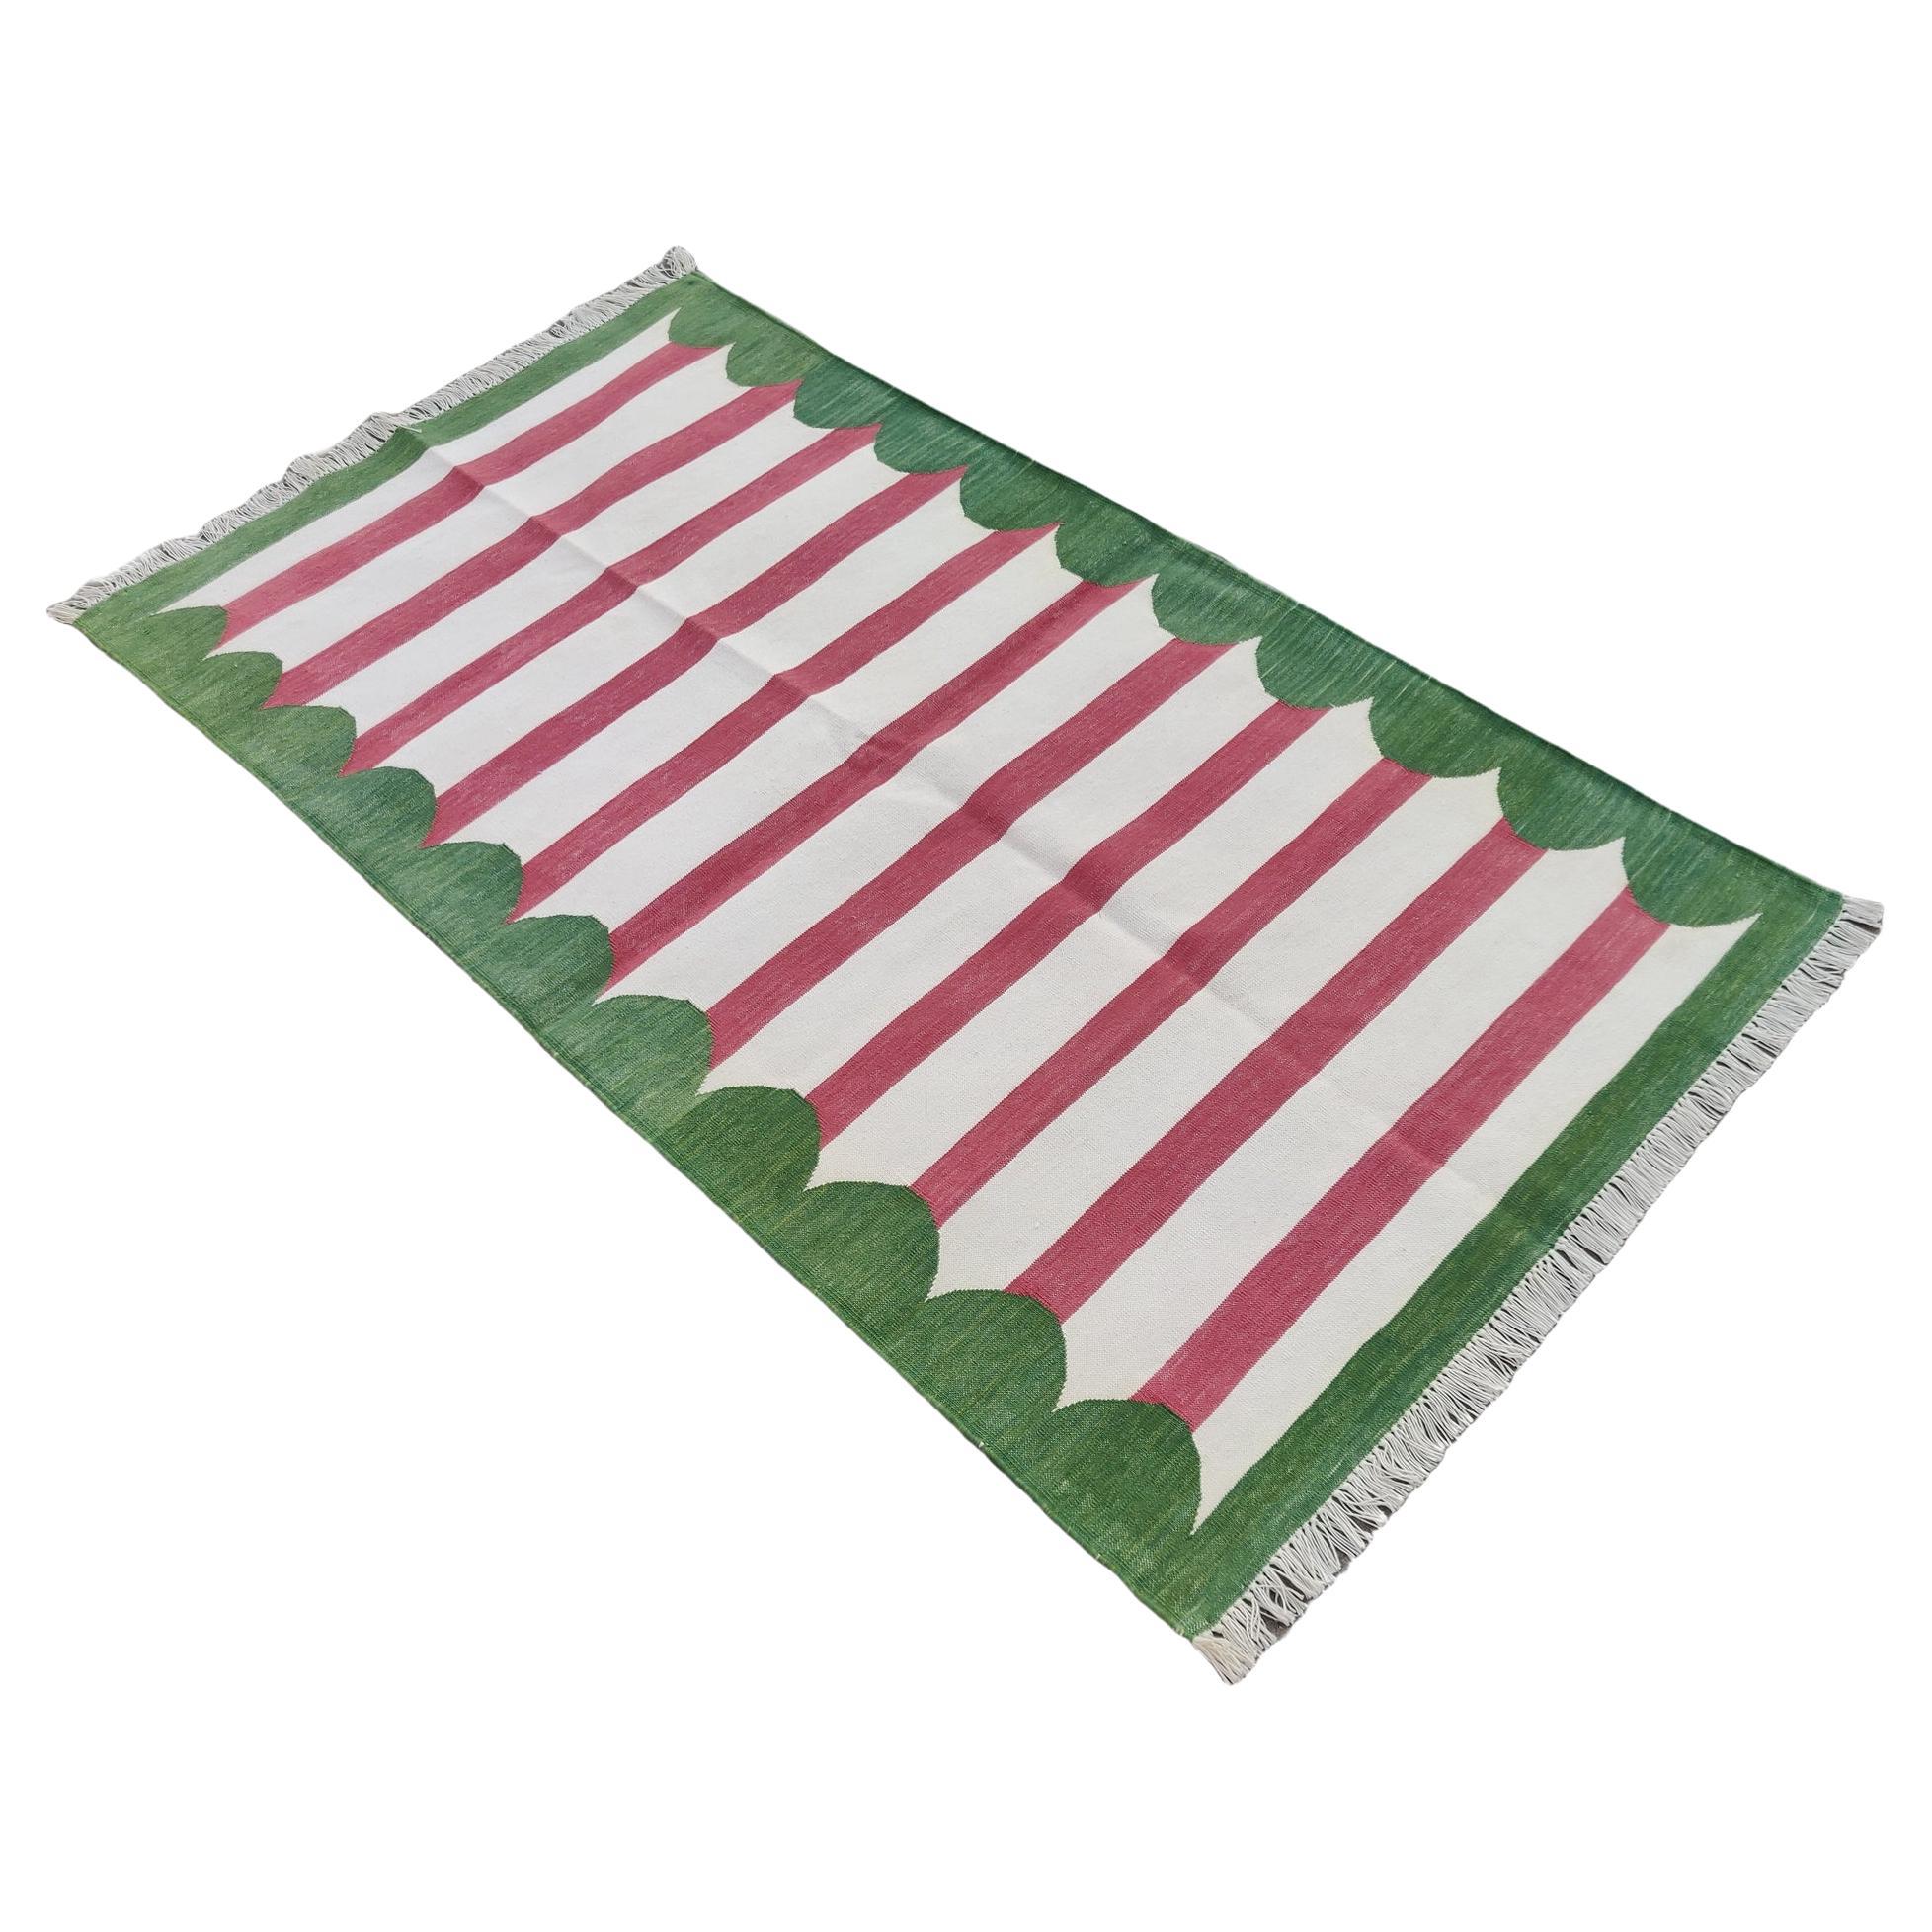 Handmade Cotton Area Flat Weave Rug, 3x5 Pink And Green Striped Indian Dhurrie For Sale